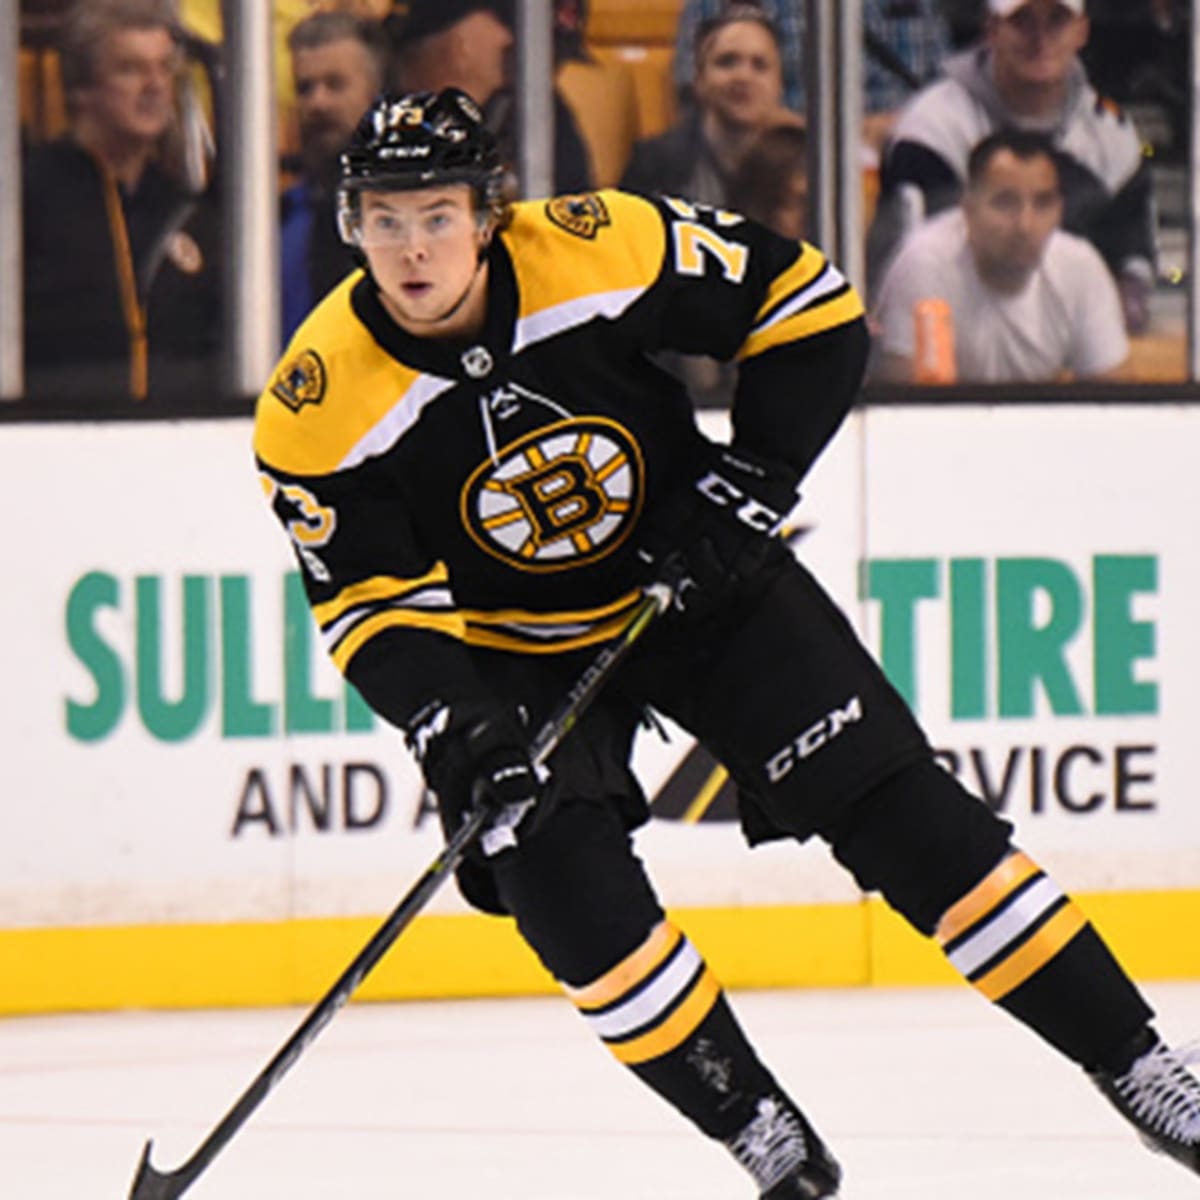 Will Charlie McAvoy get suspended for his hit on Josh Anderson?